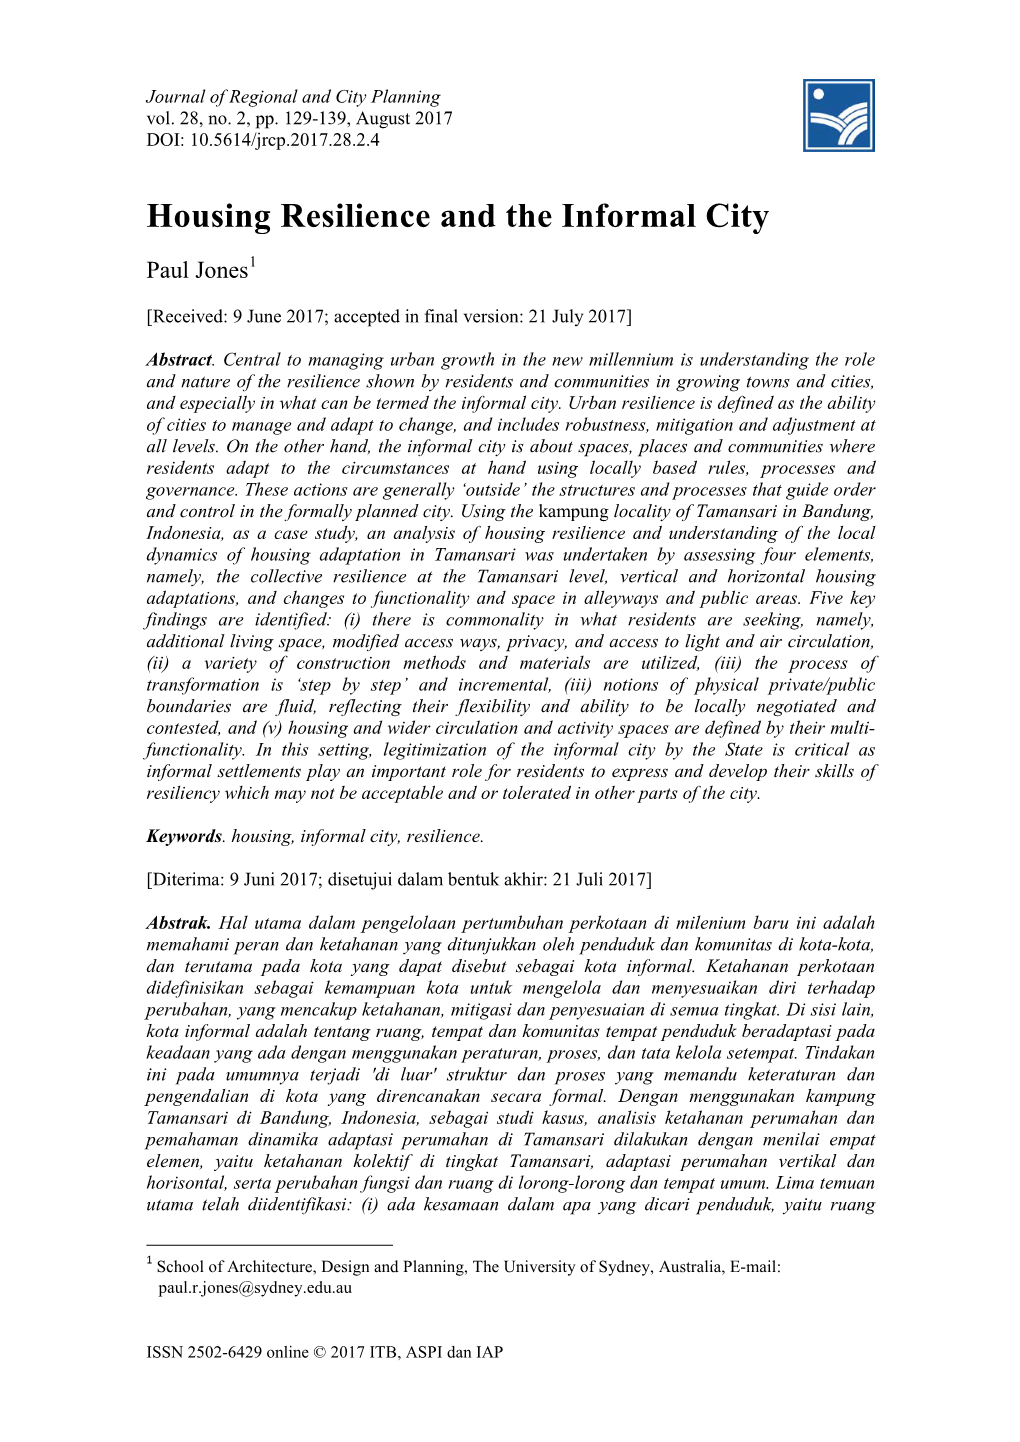 Housing Resilience and the Informal City